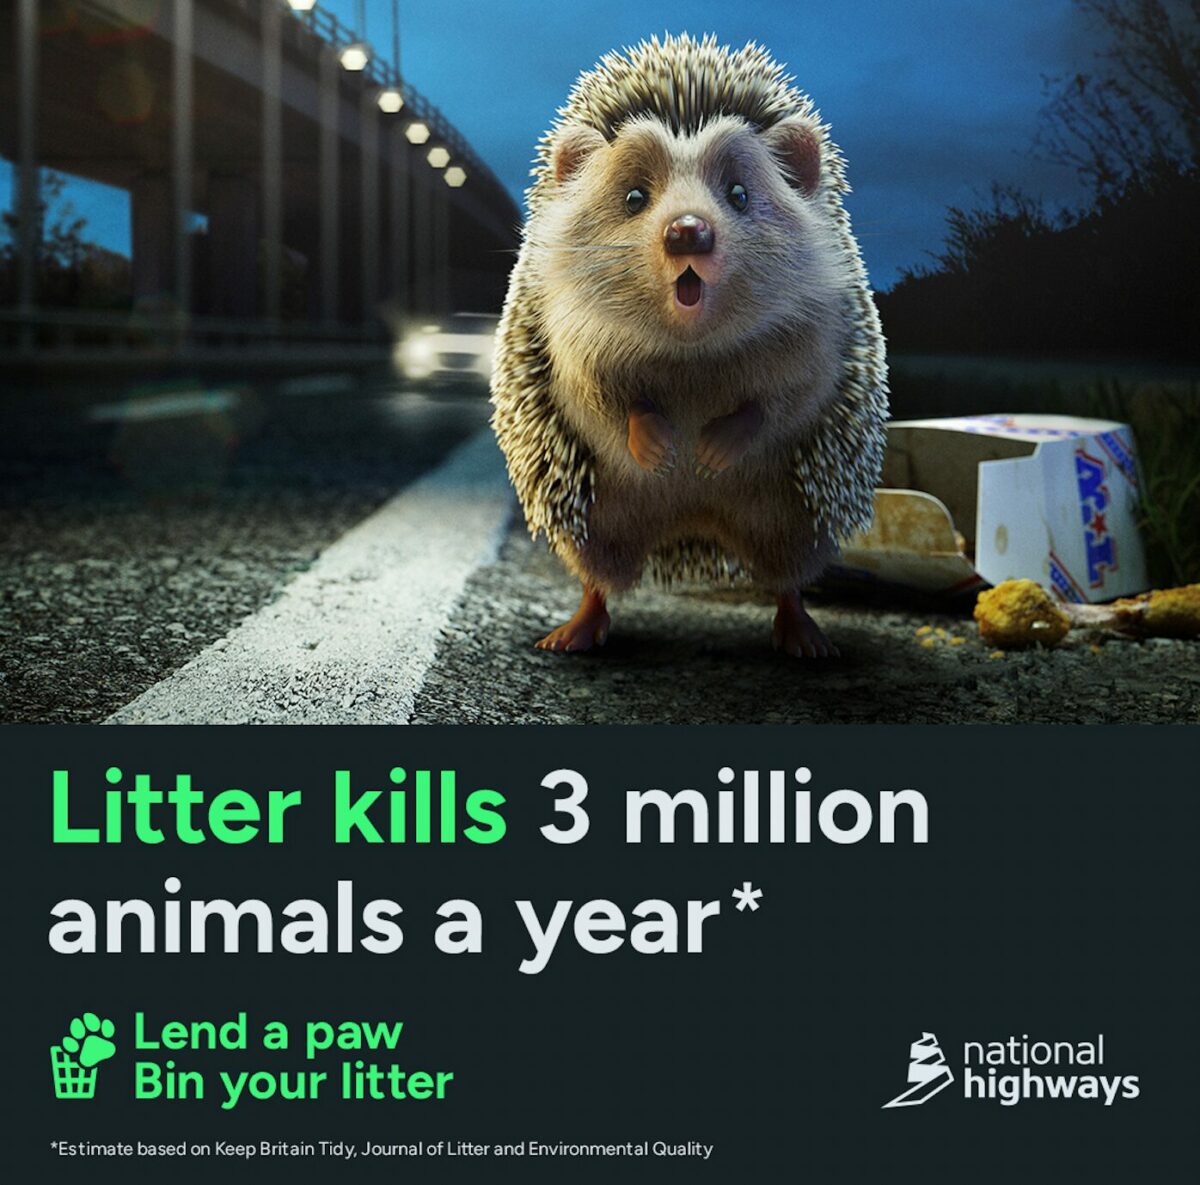 National Highways launches anti-litter campaign